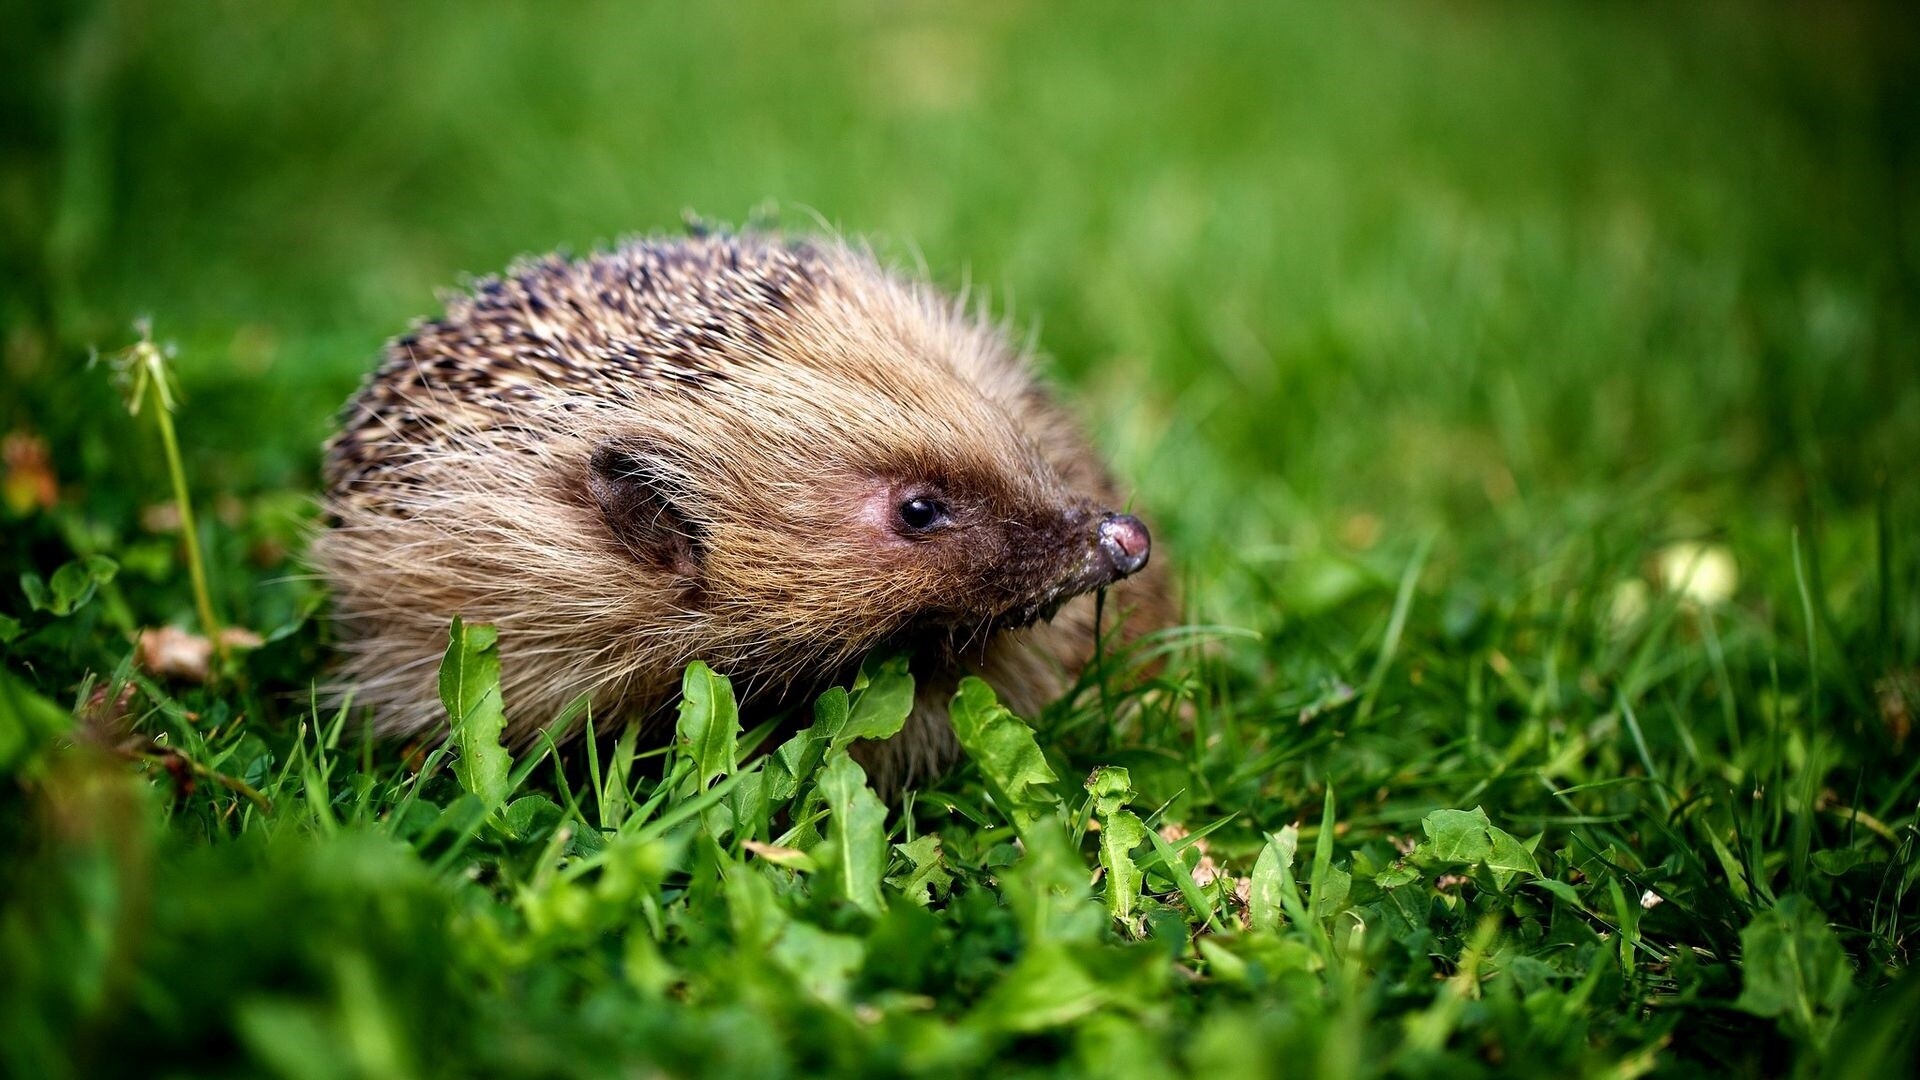 Hedgehog: A spiny mammal in the eulipotyphlan family Erinaceidae. 1920x1080 Full HD Background.